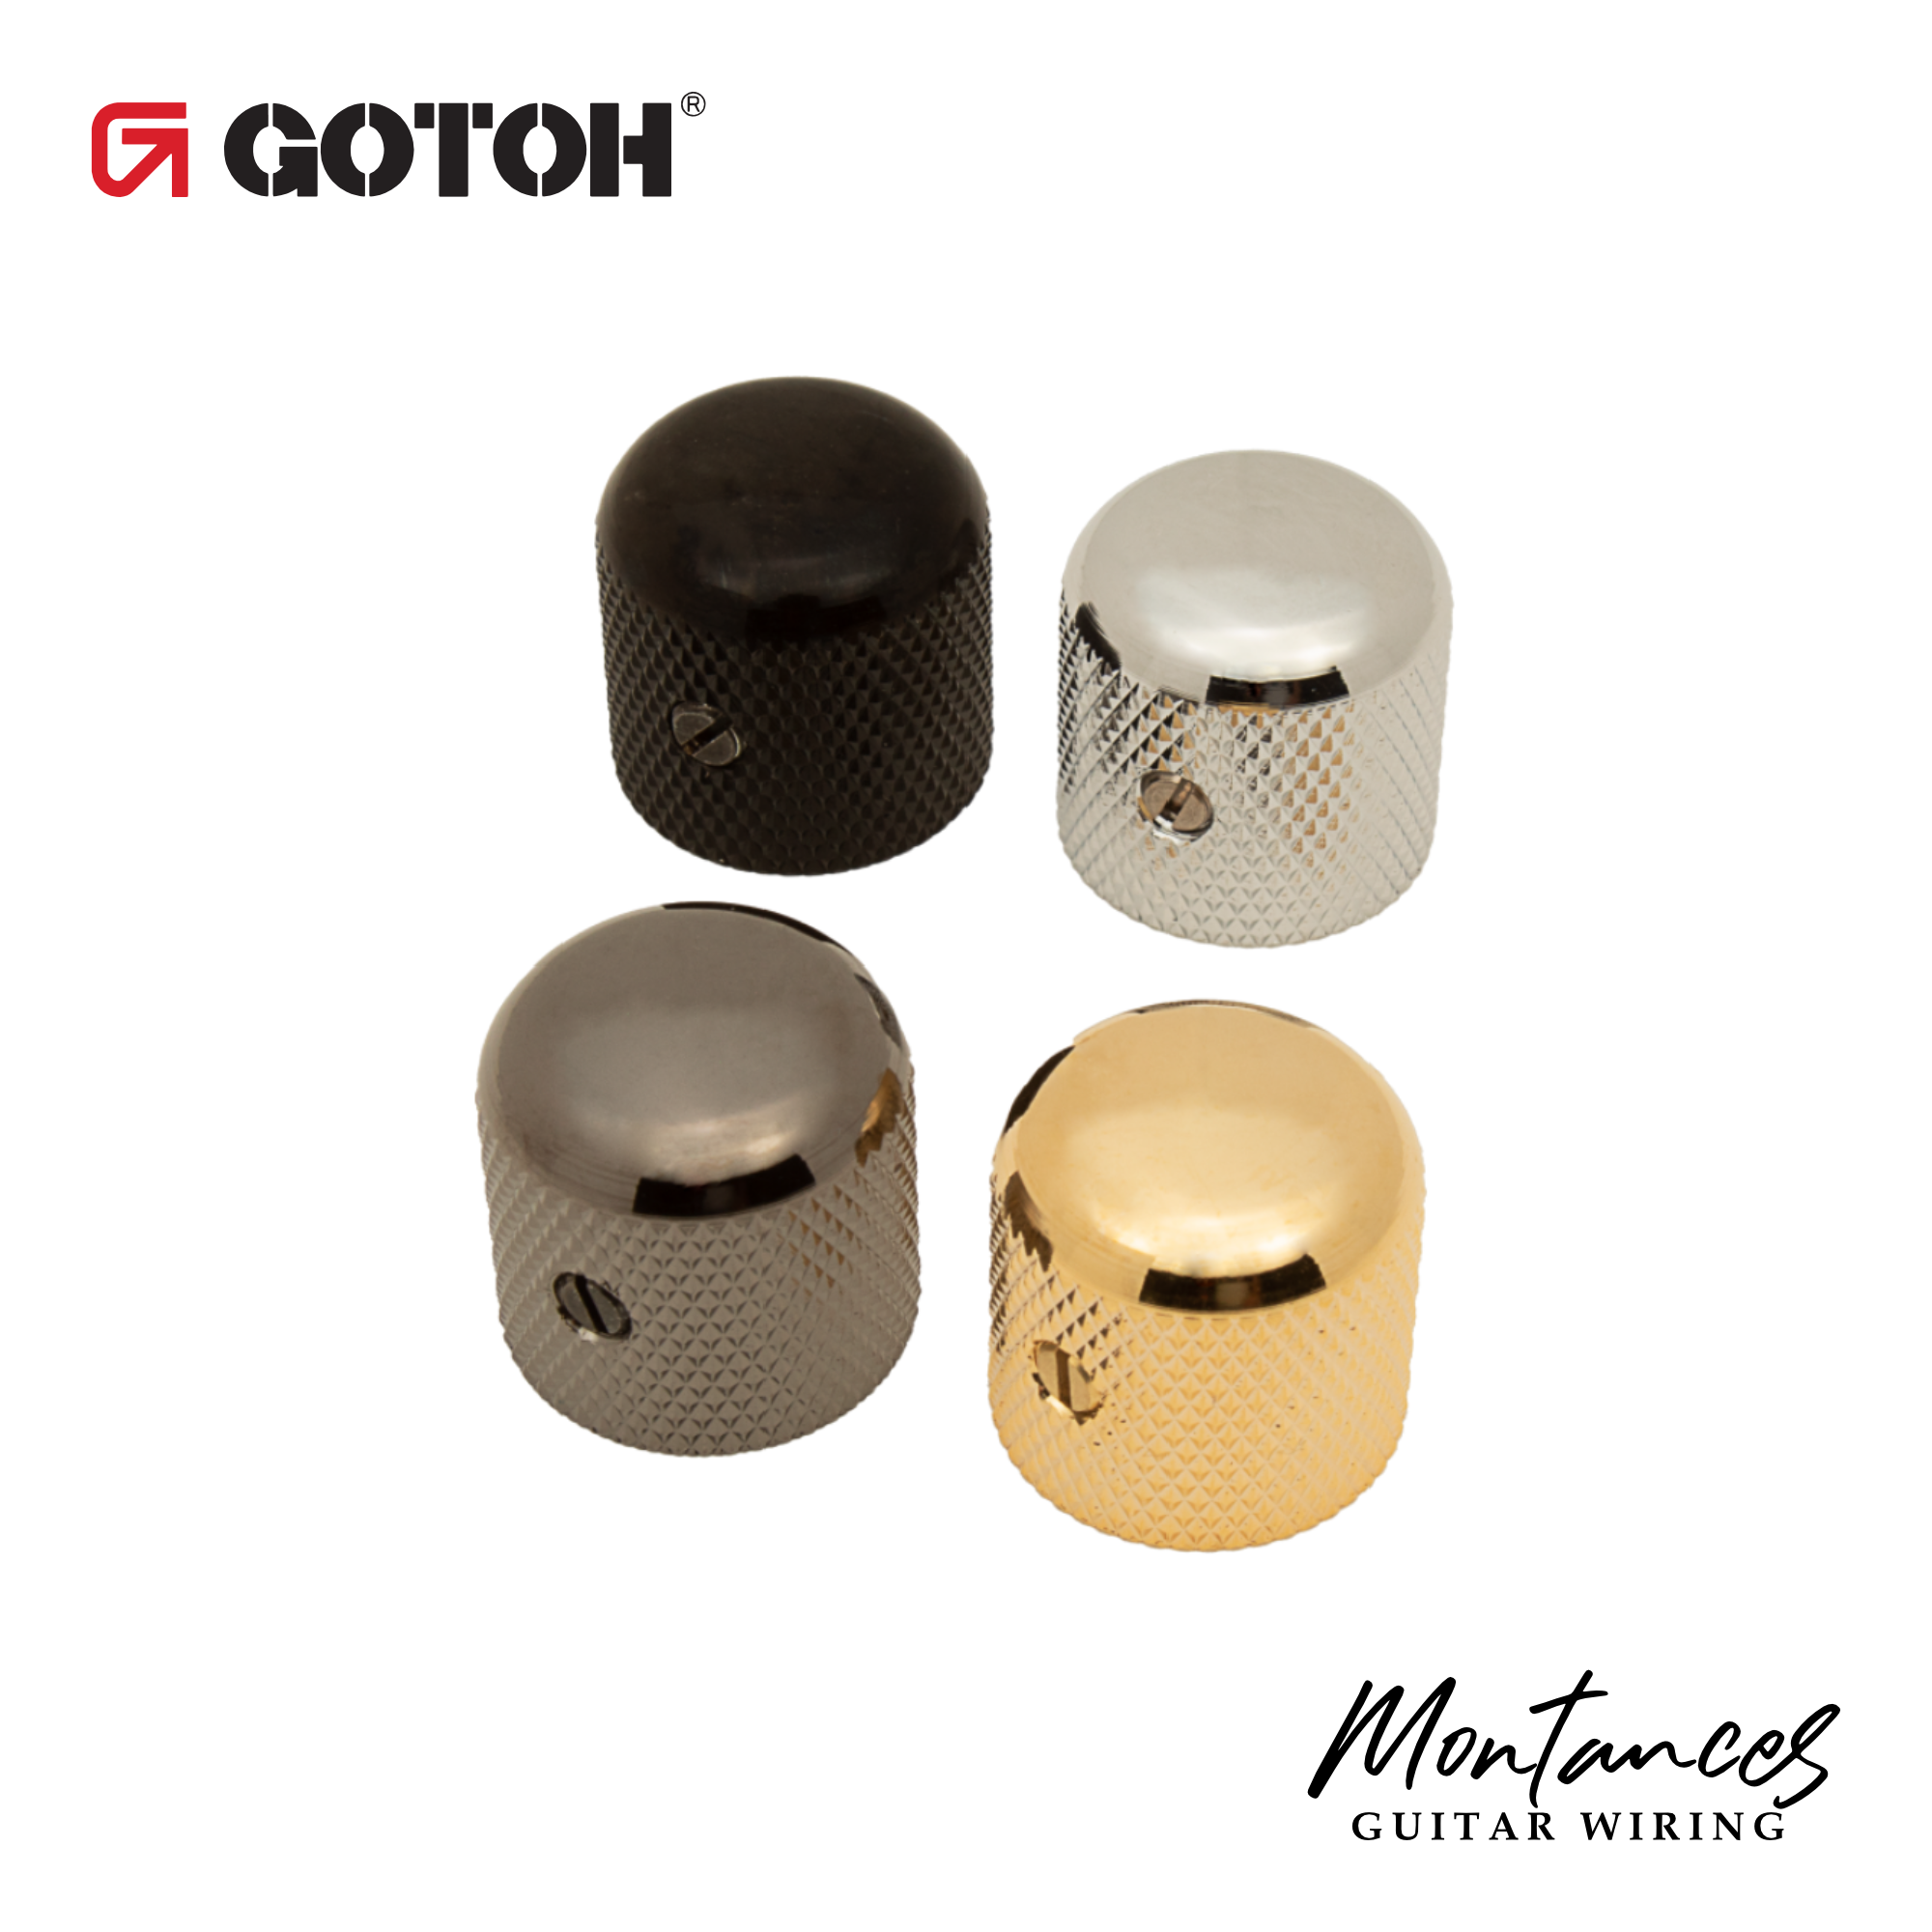 Gotoh® Metal Knobs for 6.35mm (1/4